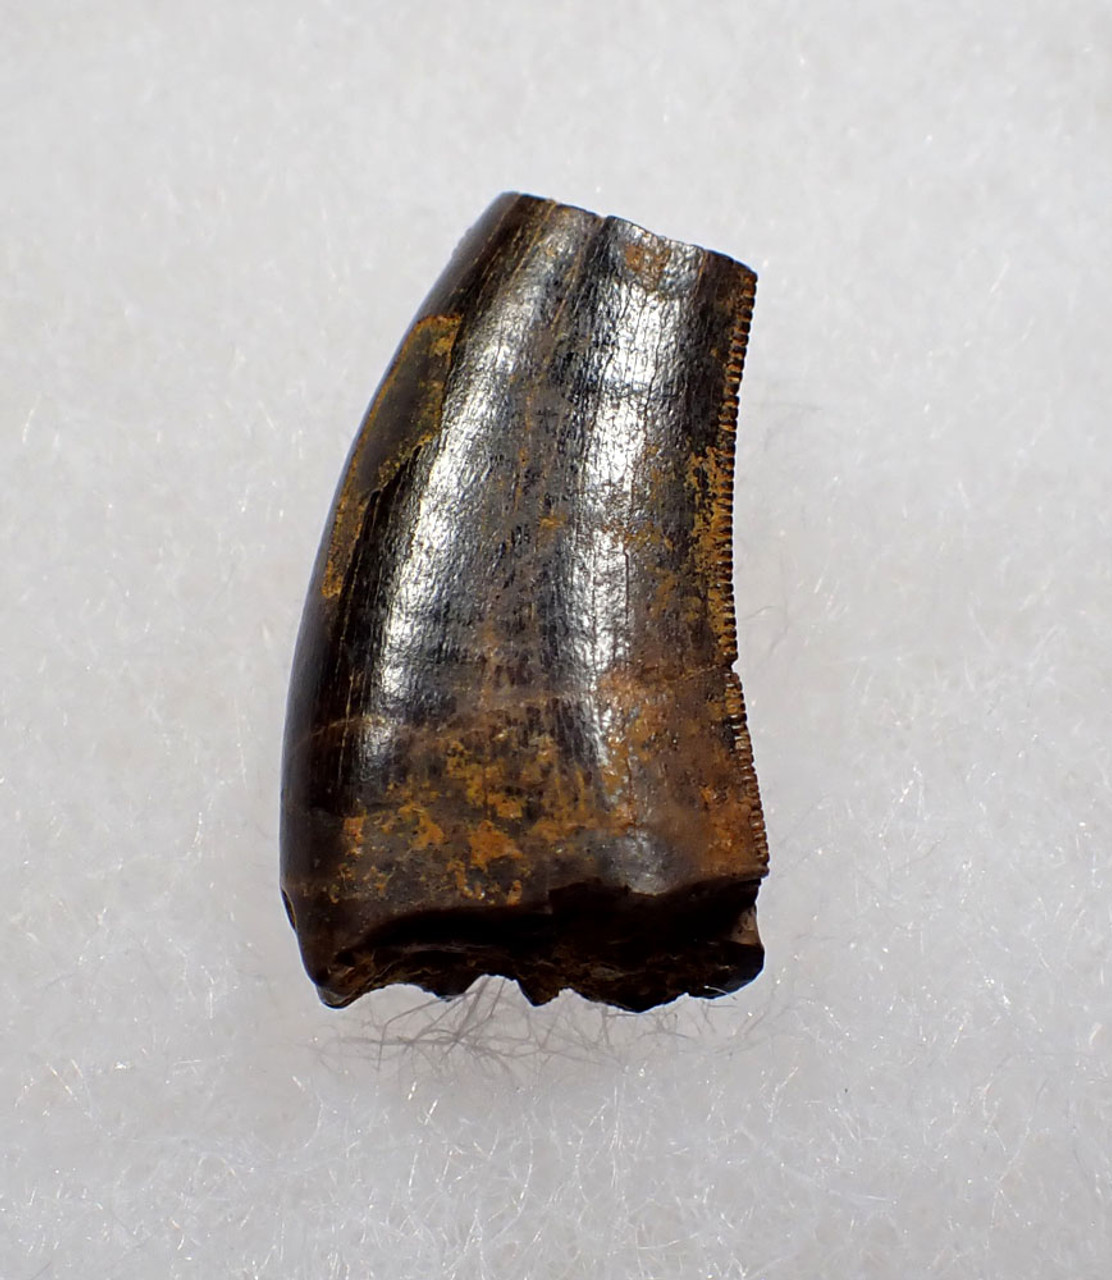 NEARLY COMPLETE JUVENILE TYRANNOSAURUS T REX FOSSIL DINOSAUR TOOTH FRAGMENT  *DT18-152